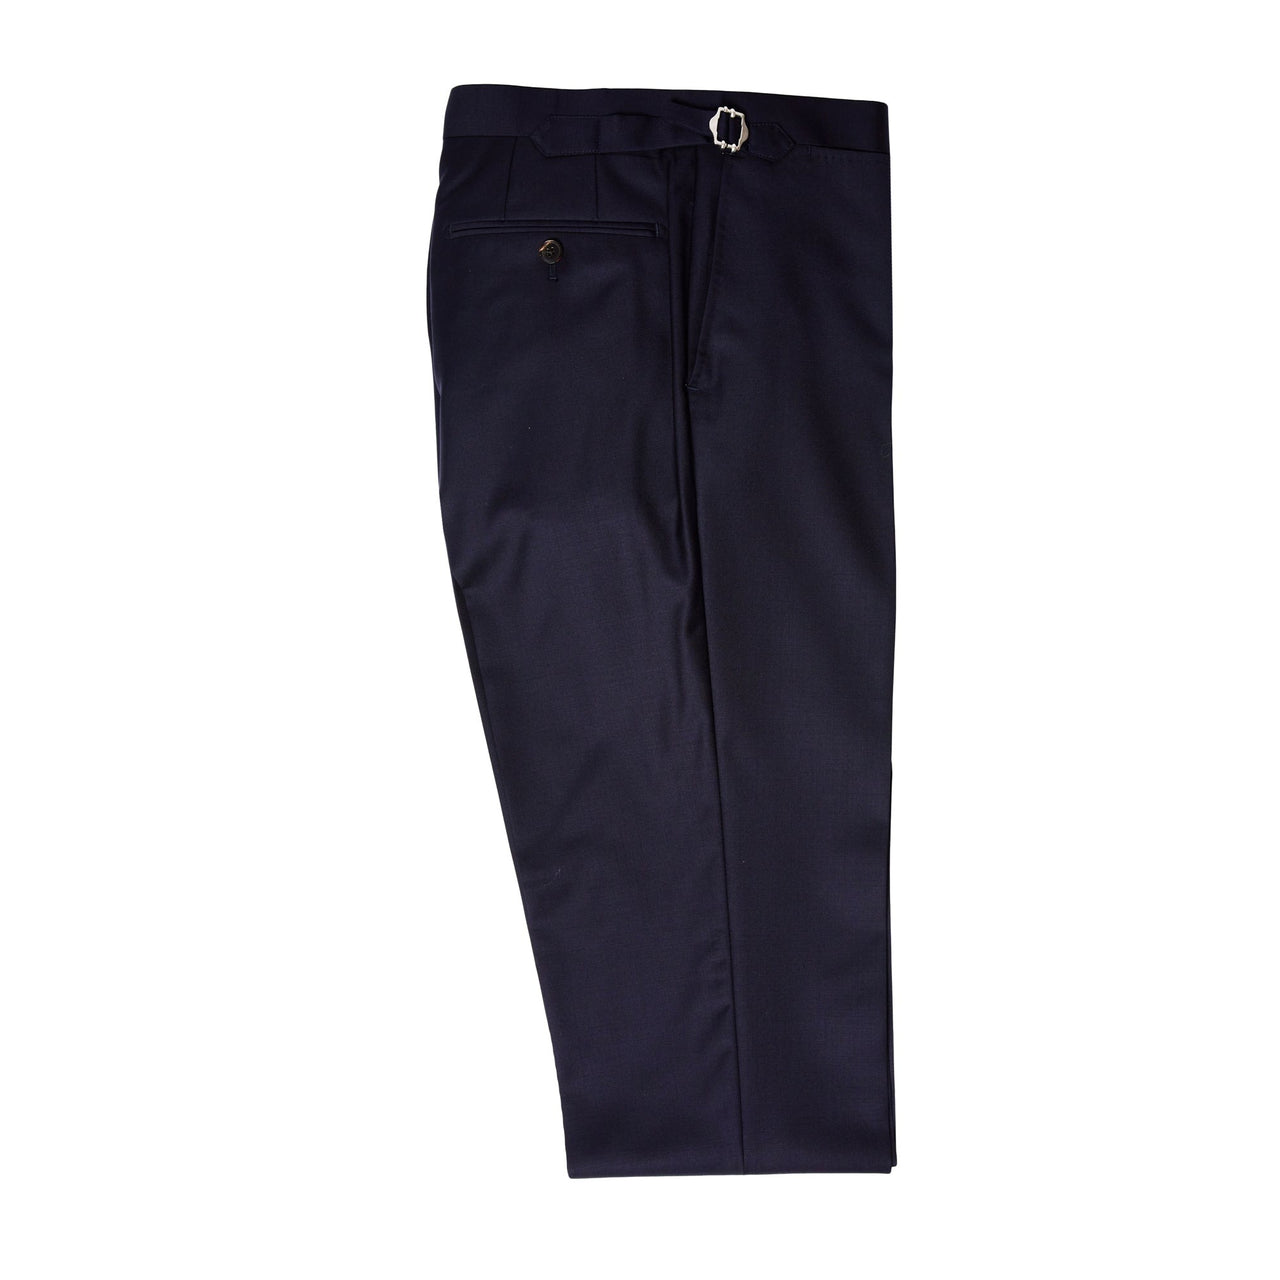 HENRY SARTORIAL Flat Front Trousers NAVY REG